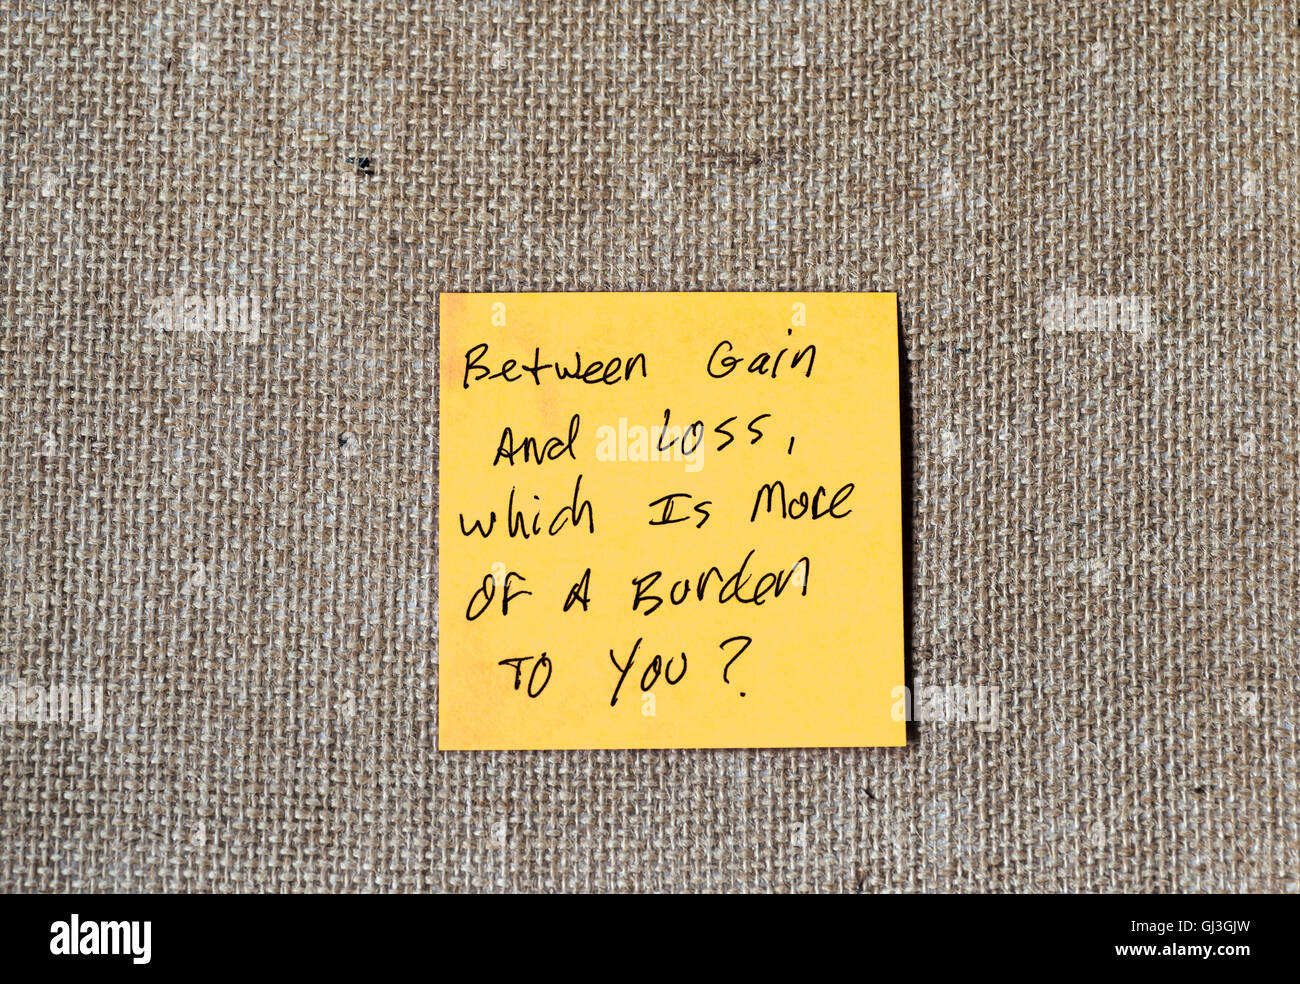 famous quote from the Tao Te Ching written on sticky notes, burlap background. Stock Photo